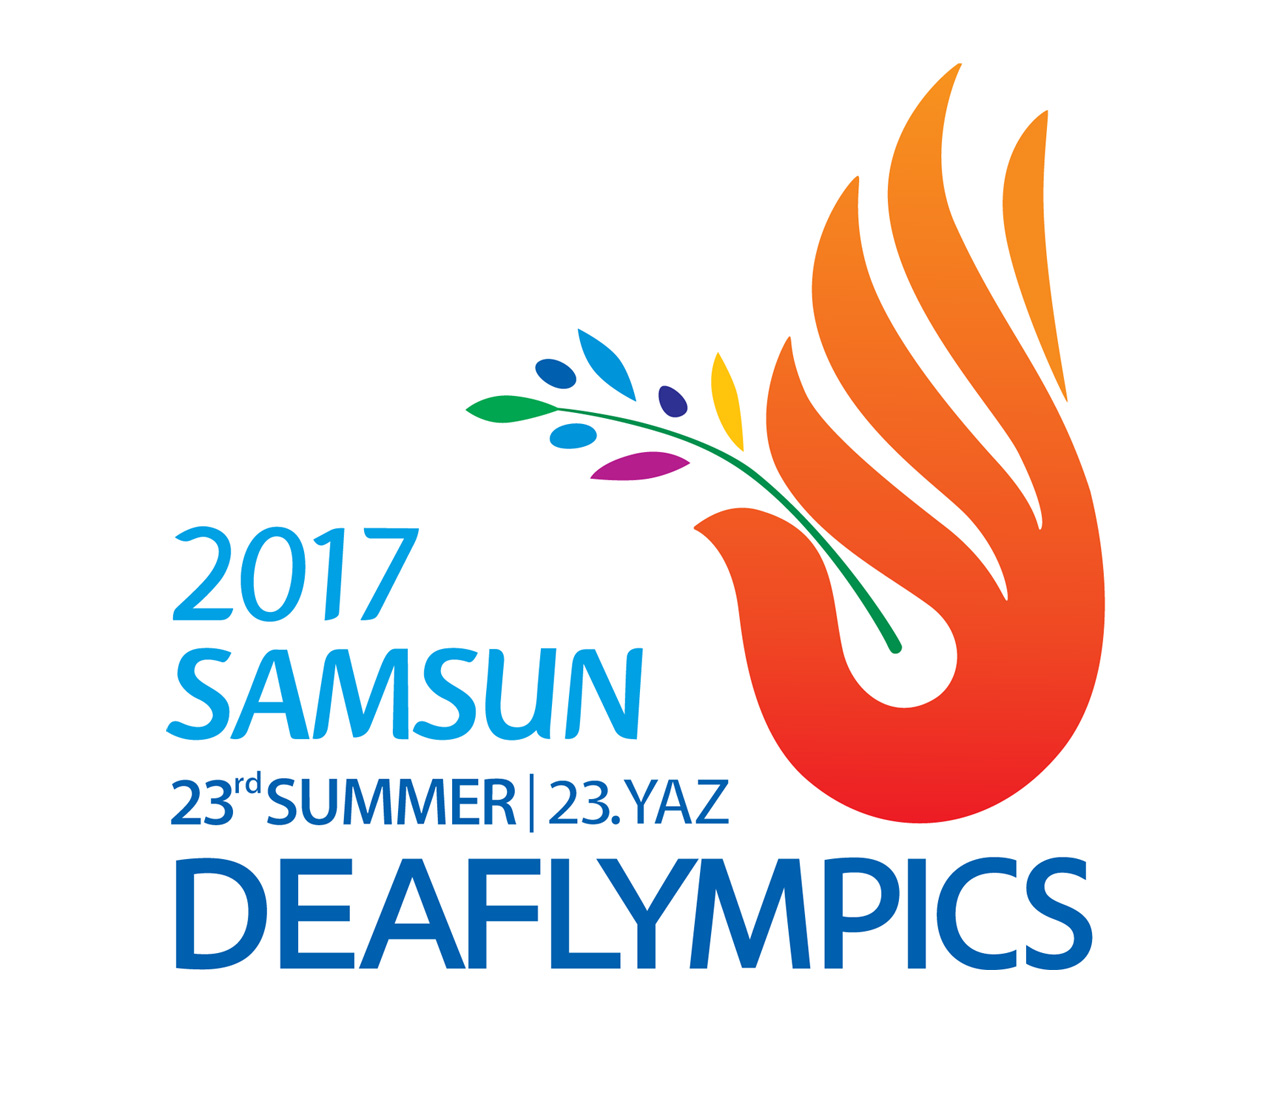 Deaflympic Games Official Logo